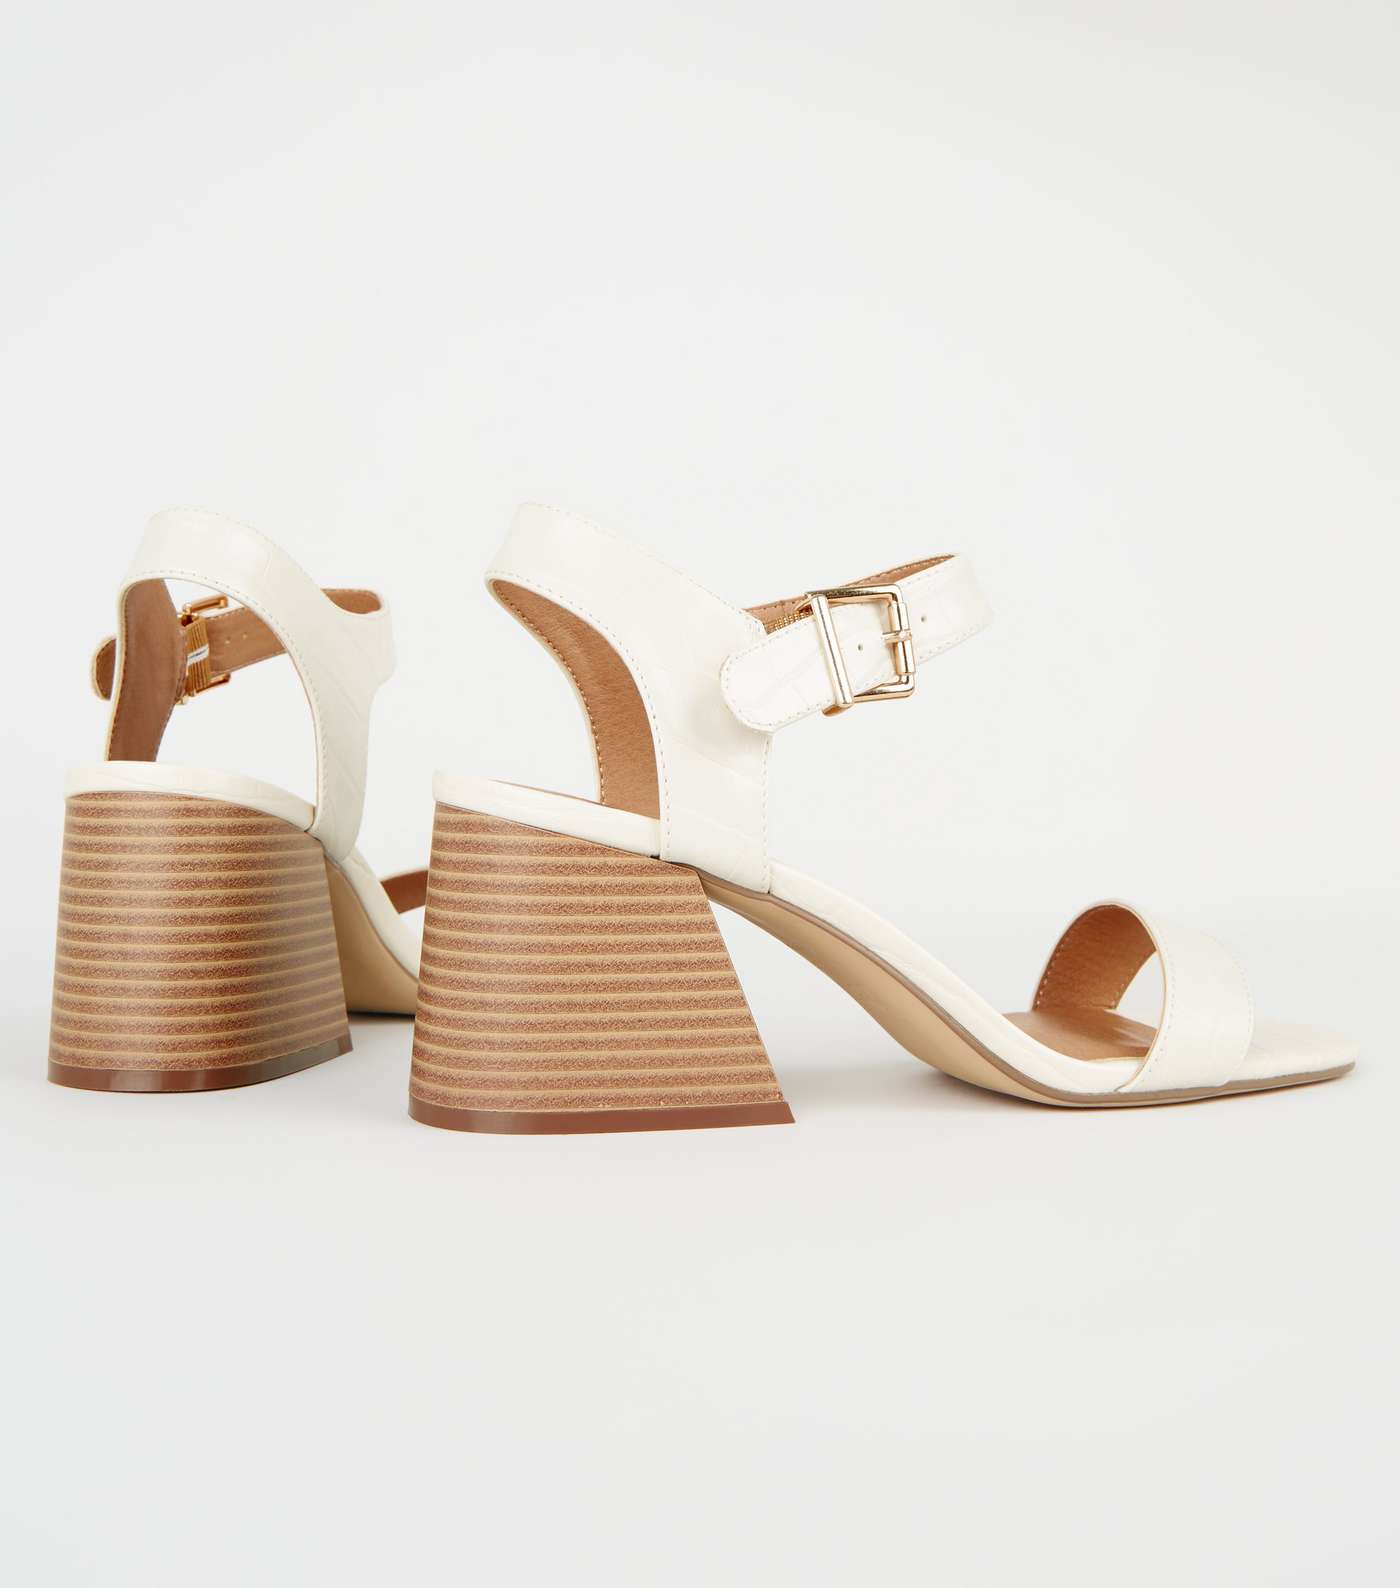 Off White Faux Croc Flared Block Heel Sandals Image 3